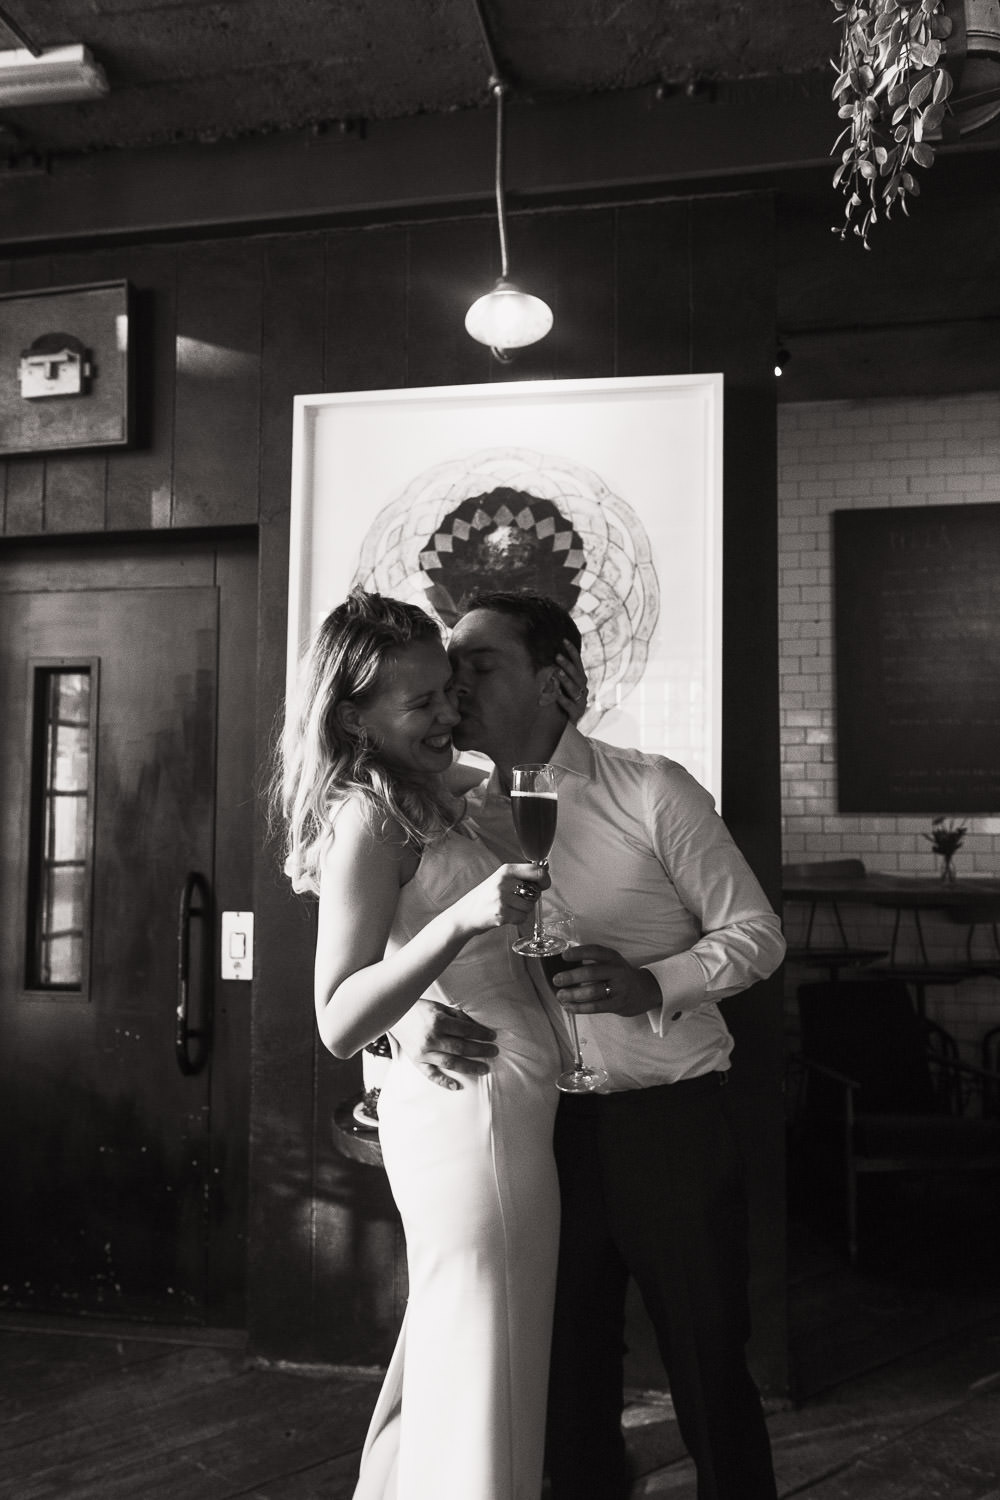 A candid photograph of a man kissing his wife at wedding reception at Never For Ever restaurant. London wedding.